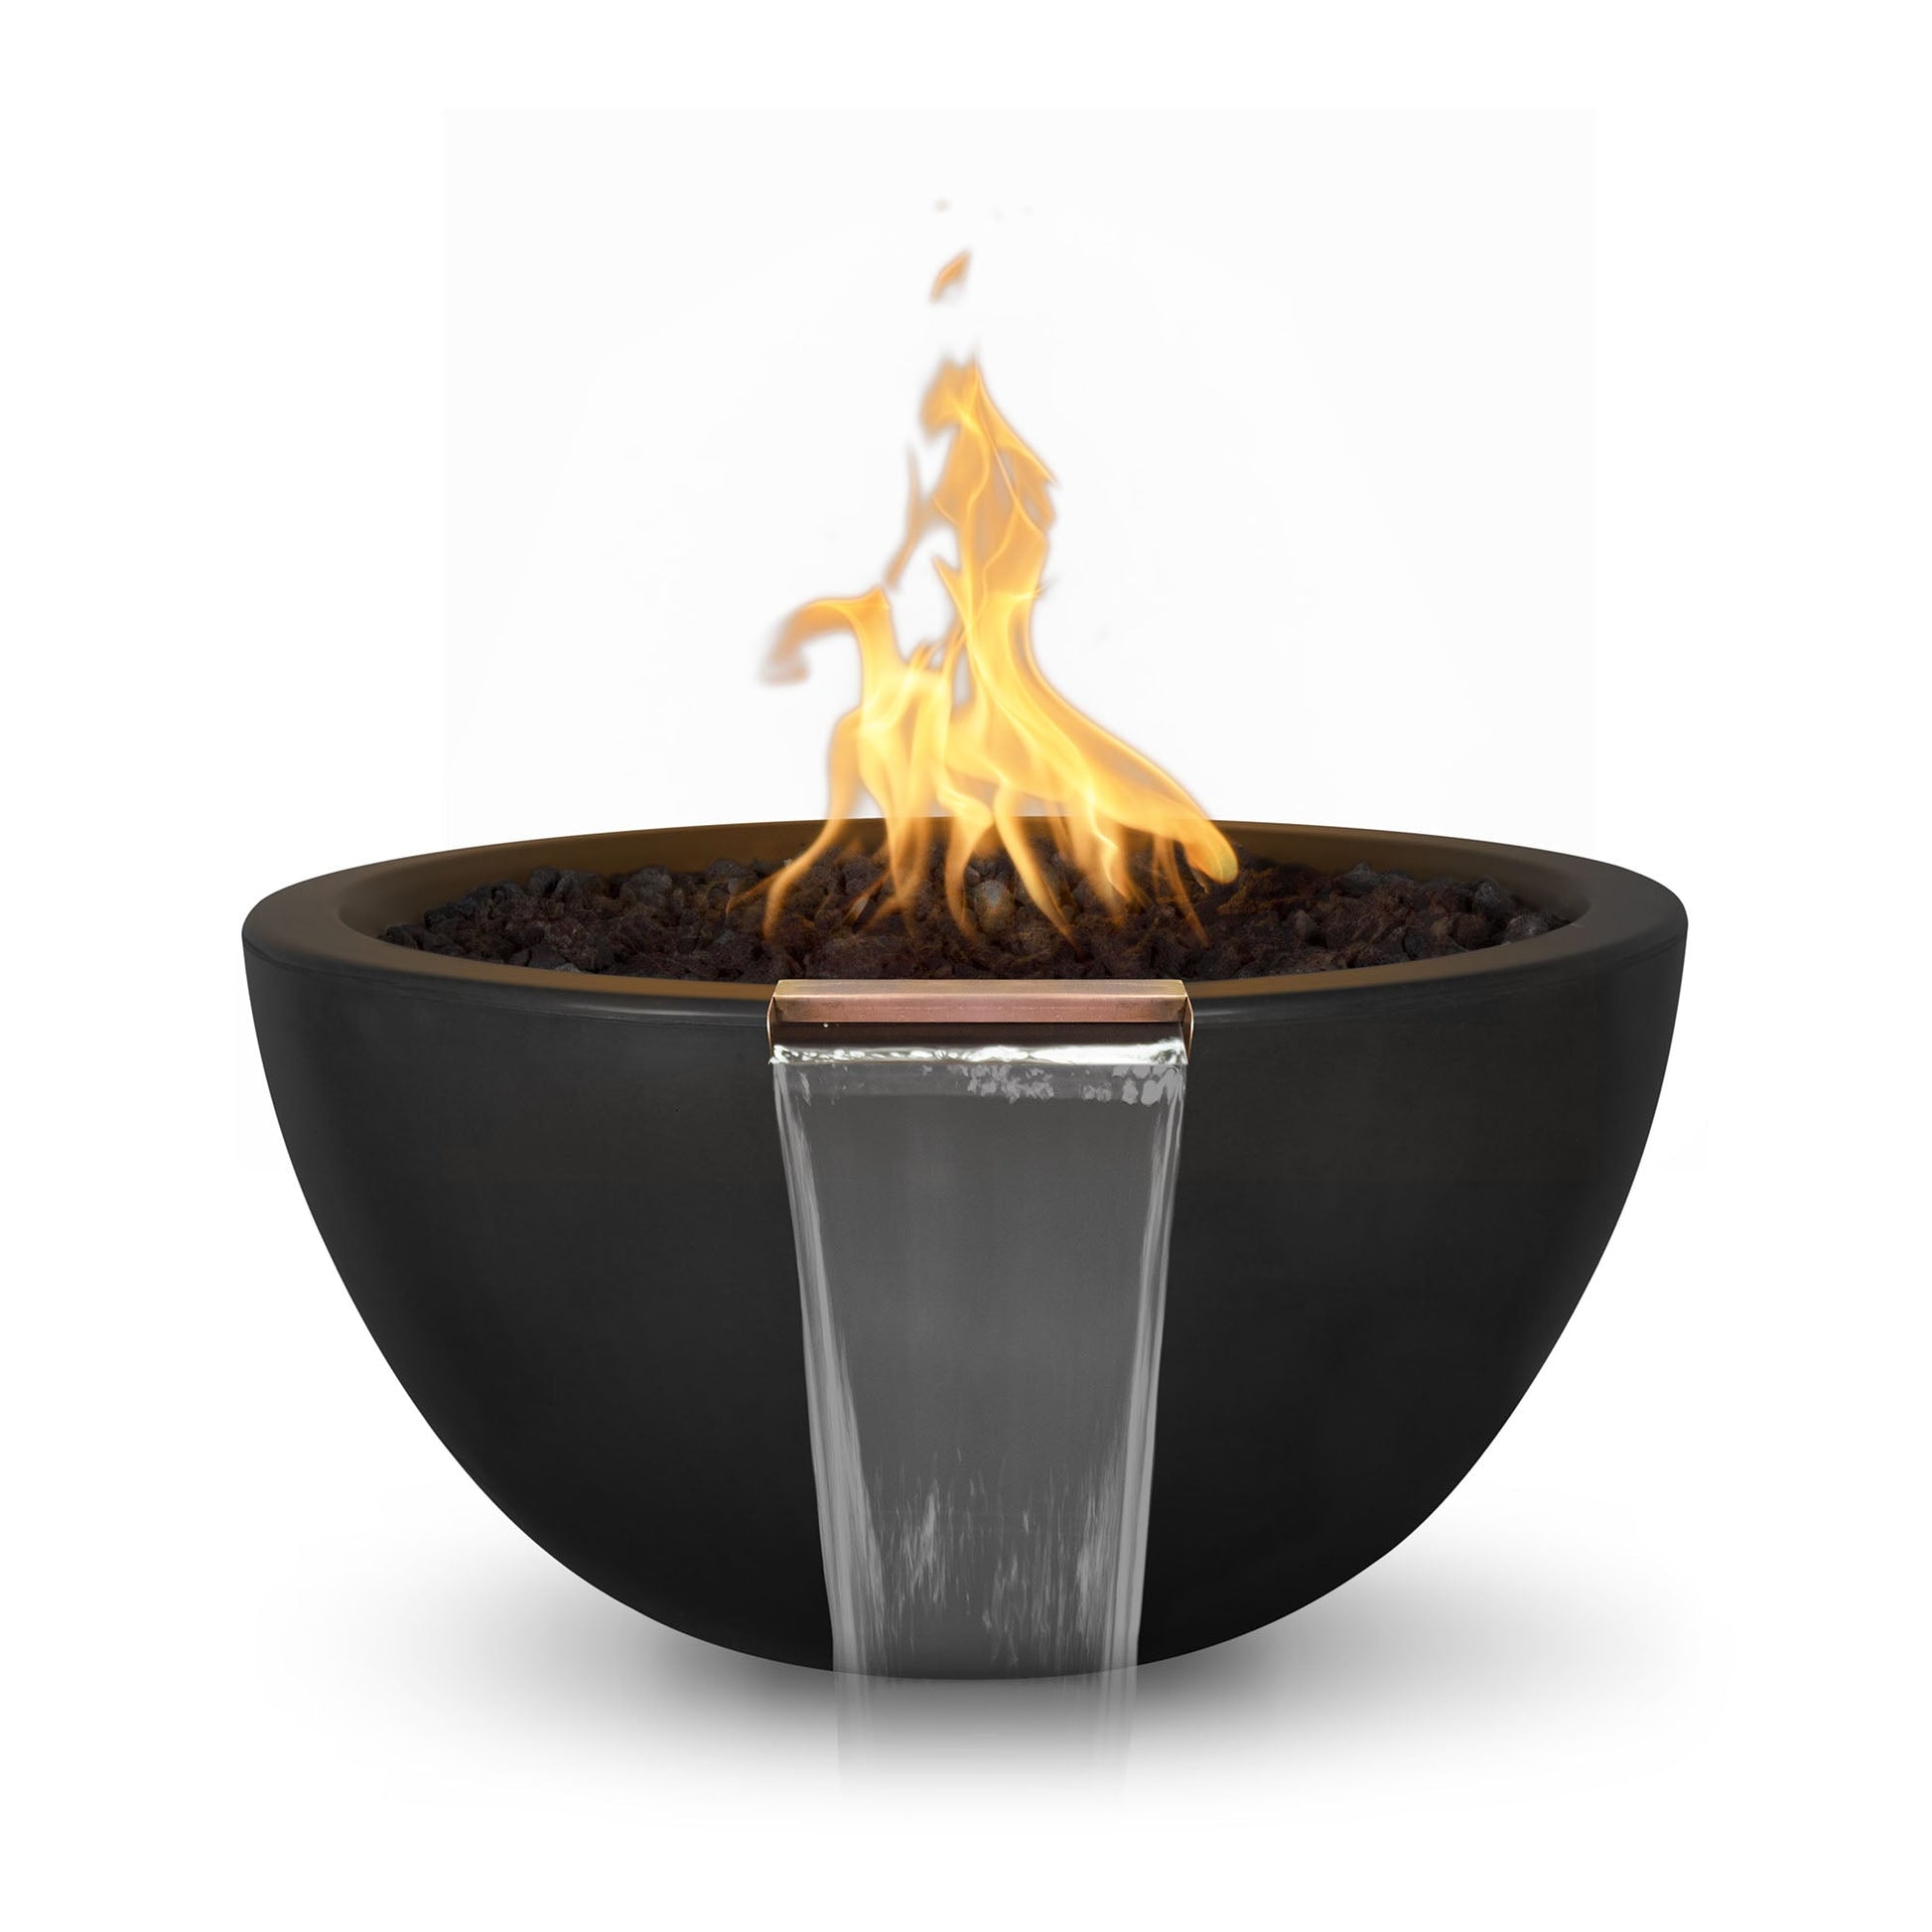 The Outdoor Plus Round Luna 30" Ash GFRC Concrete Natural Gas Fire & Water Bowl with Match Lit with Flame Sense Ignition